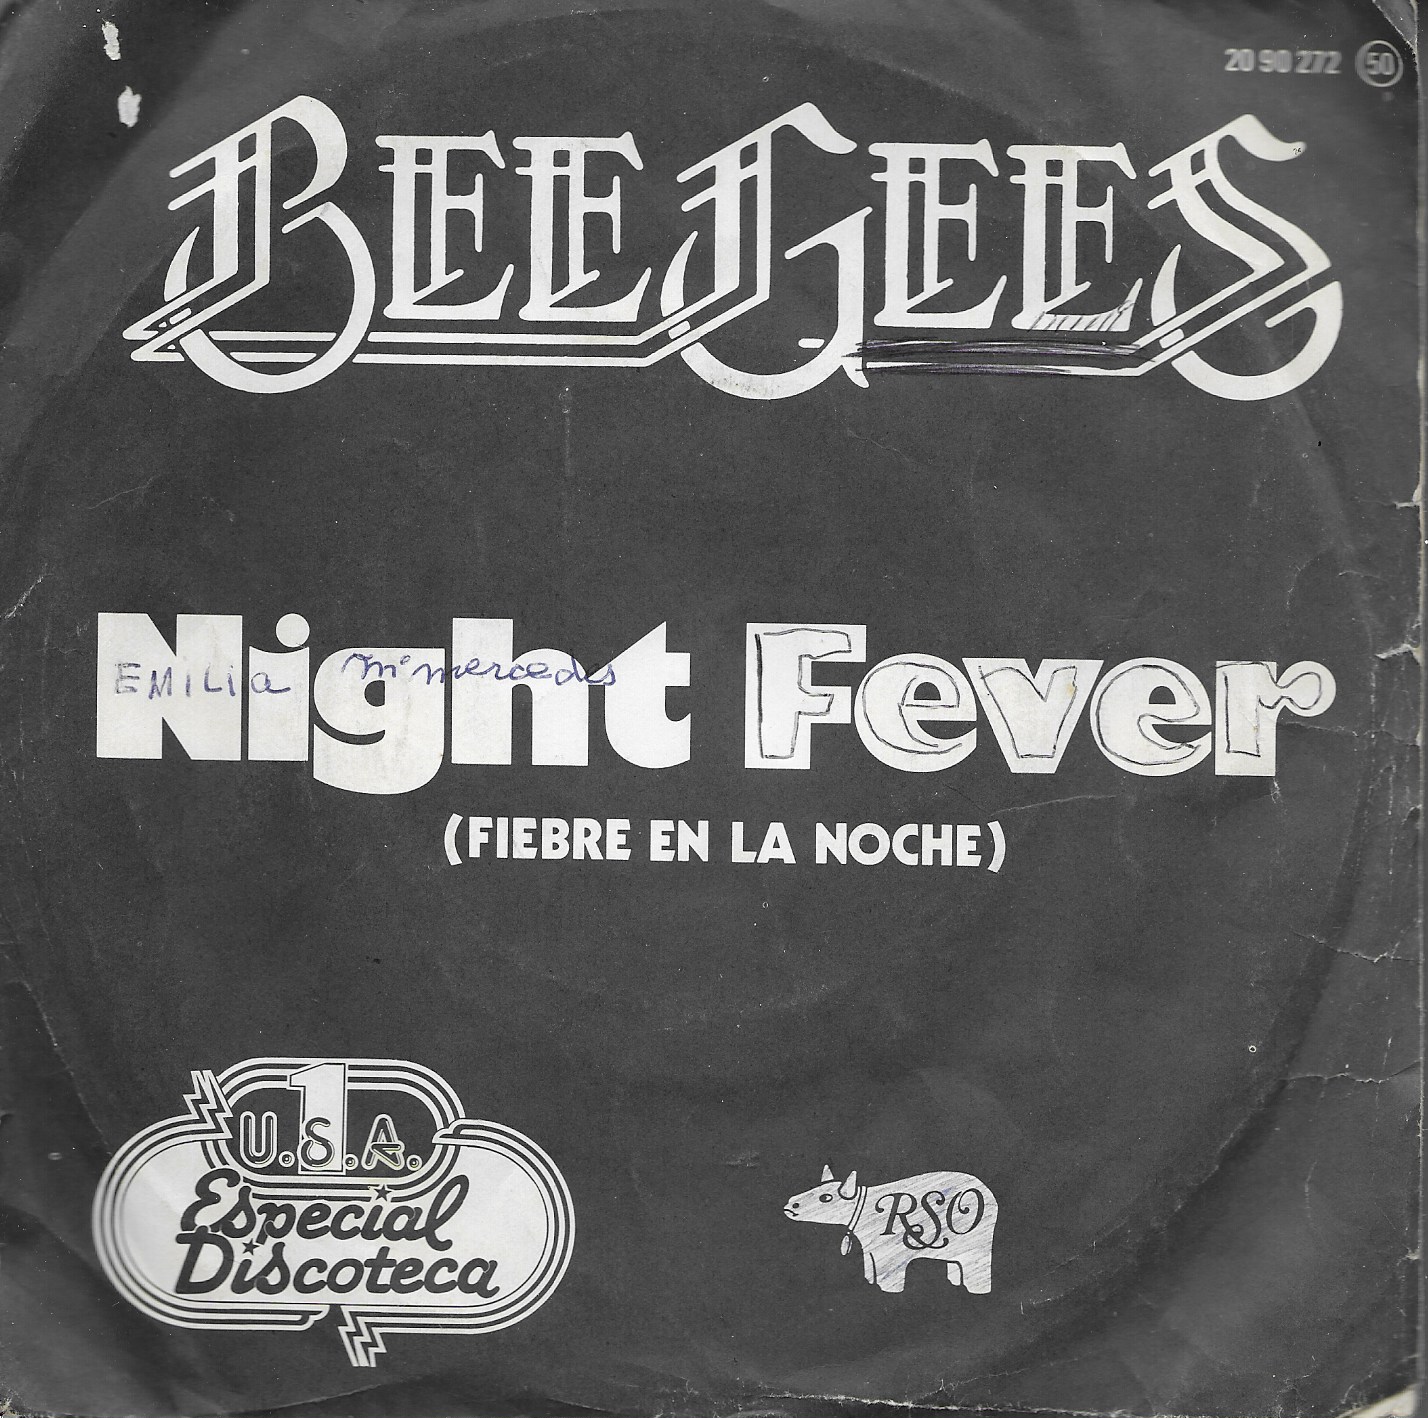 Bee Gees. Night Fever. RSO 1977. 45RPM SP 2 títulos: Night Fever/Down the road